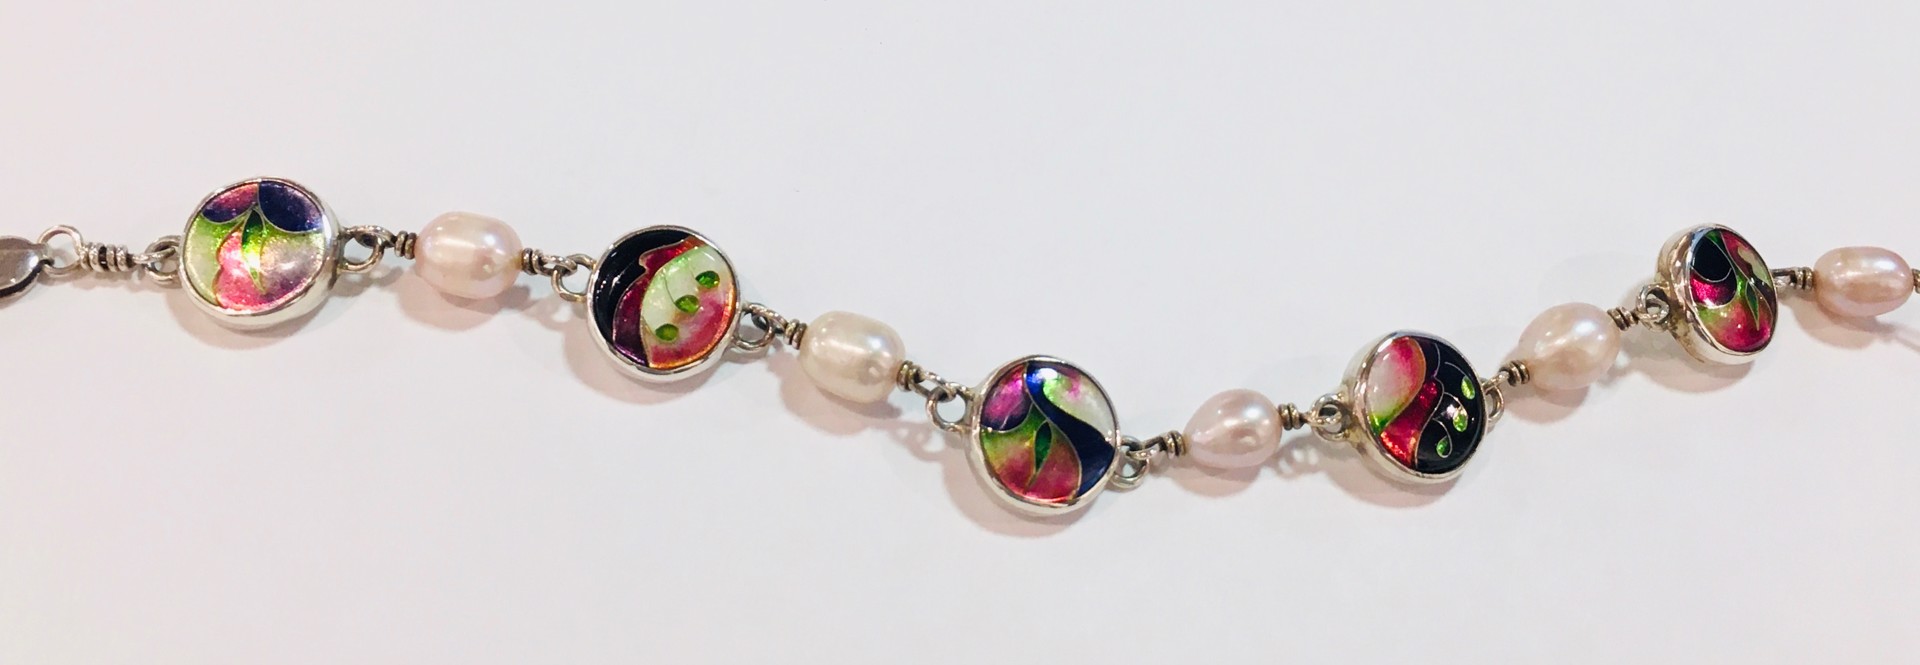 Cloisonne Bracelet with Pearls by RICKY FRANK